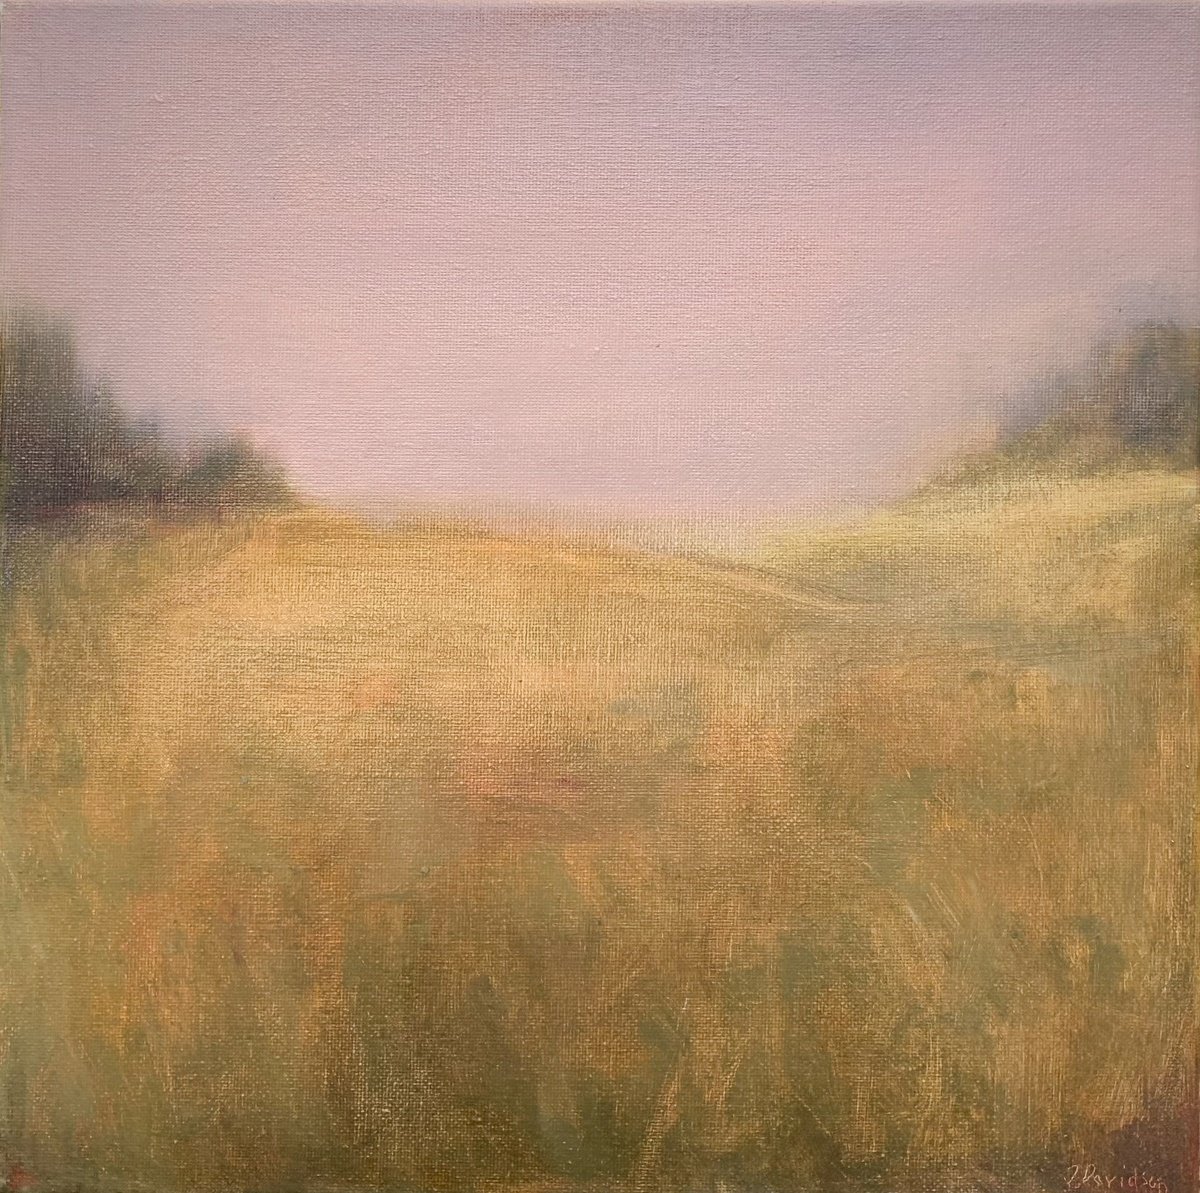 Where The Grass is Always Green, no2 by Jessica Davidson